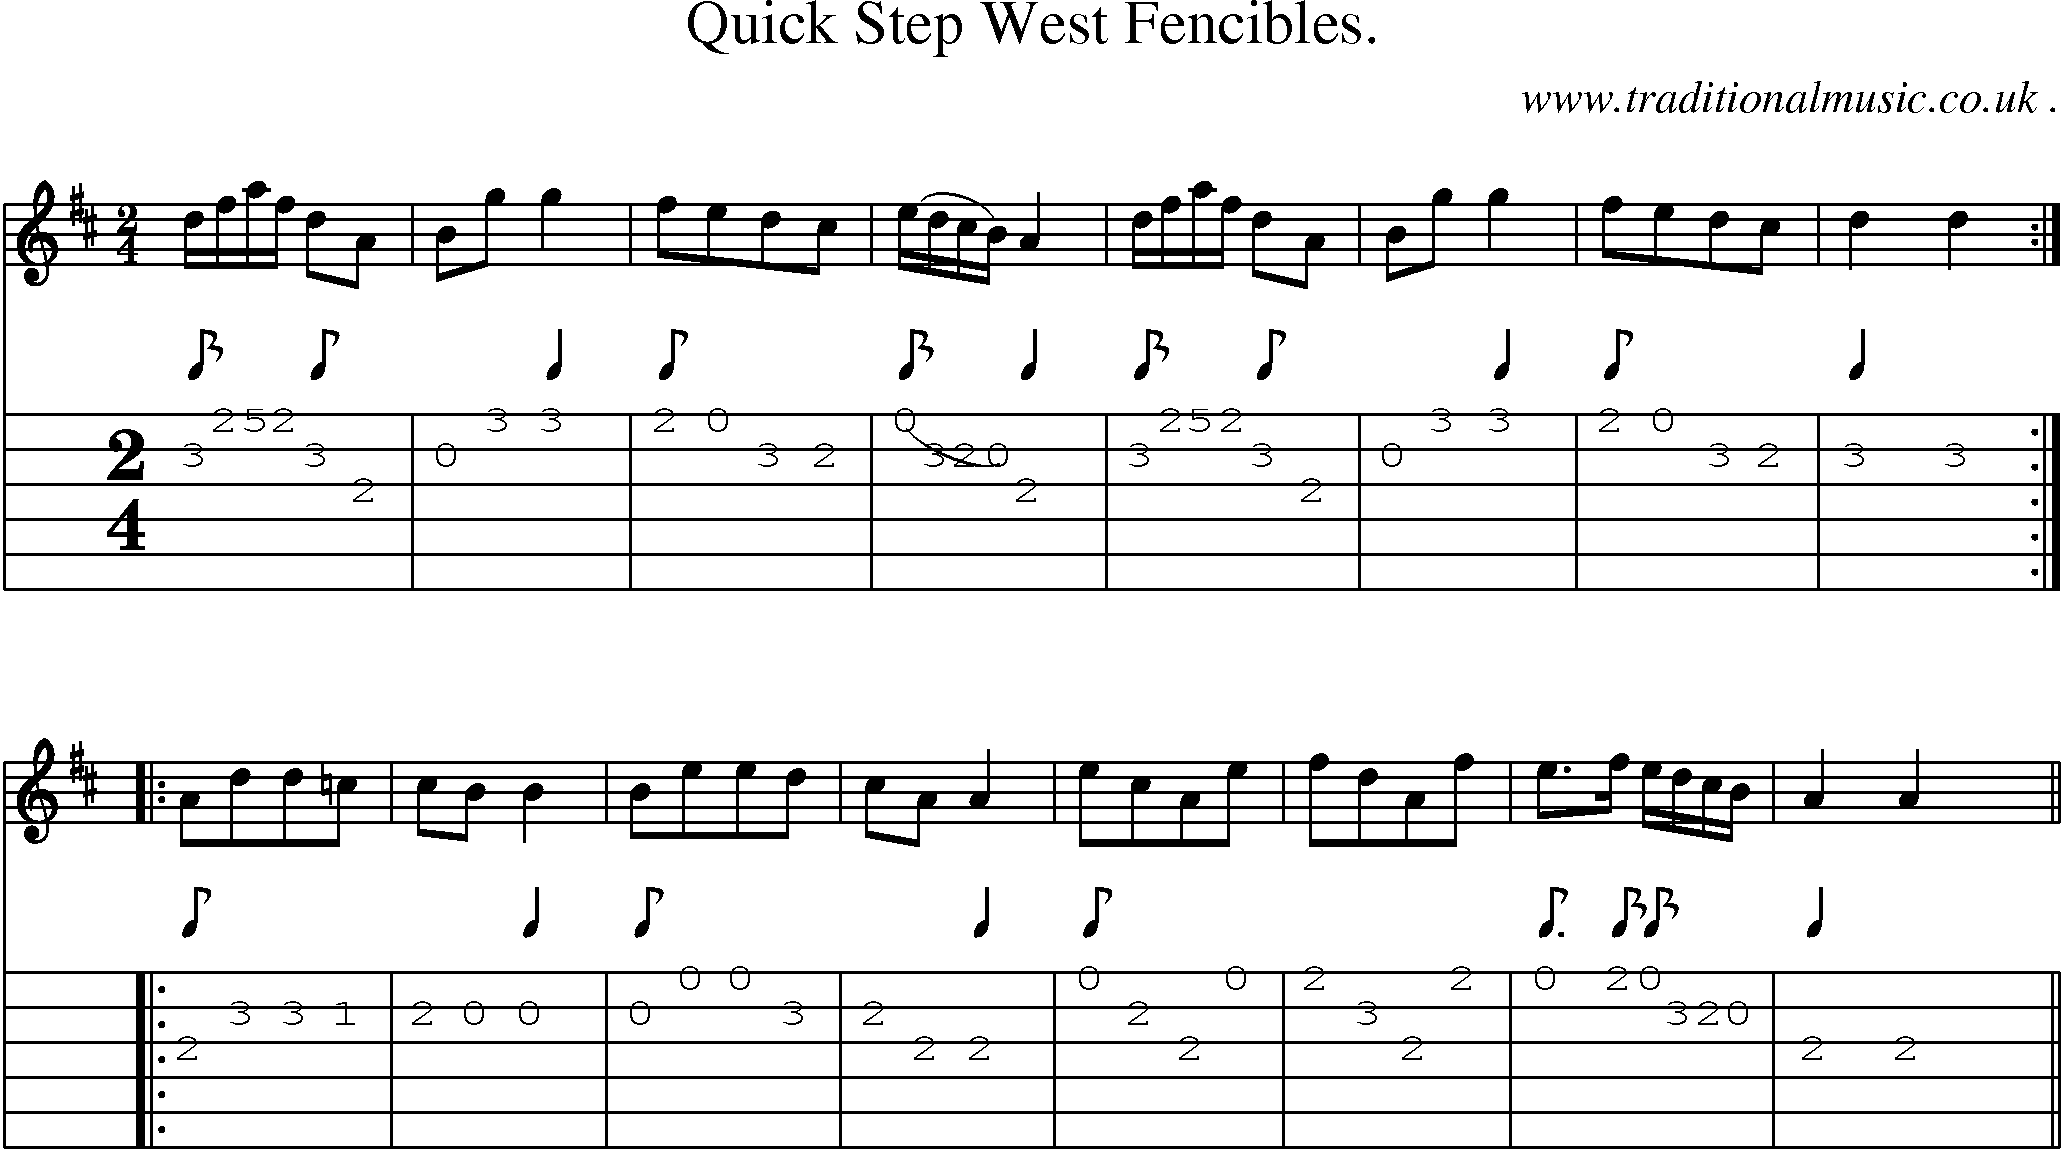 Sheet-music  score, Chords and Guitar Tabs for Quick Step West Fencibles